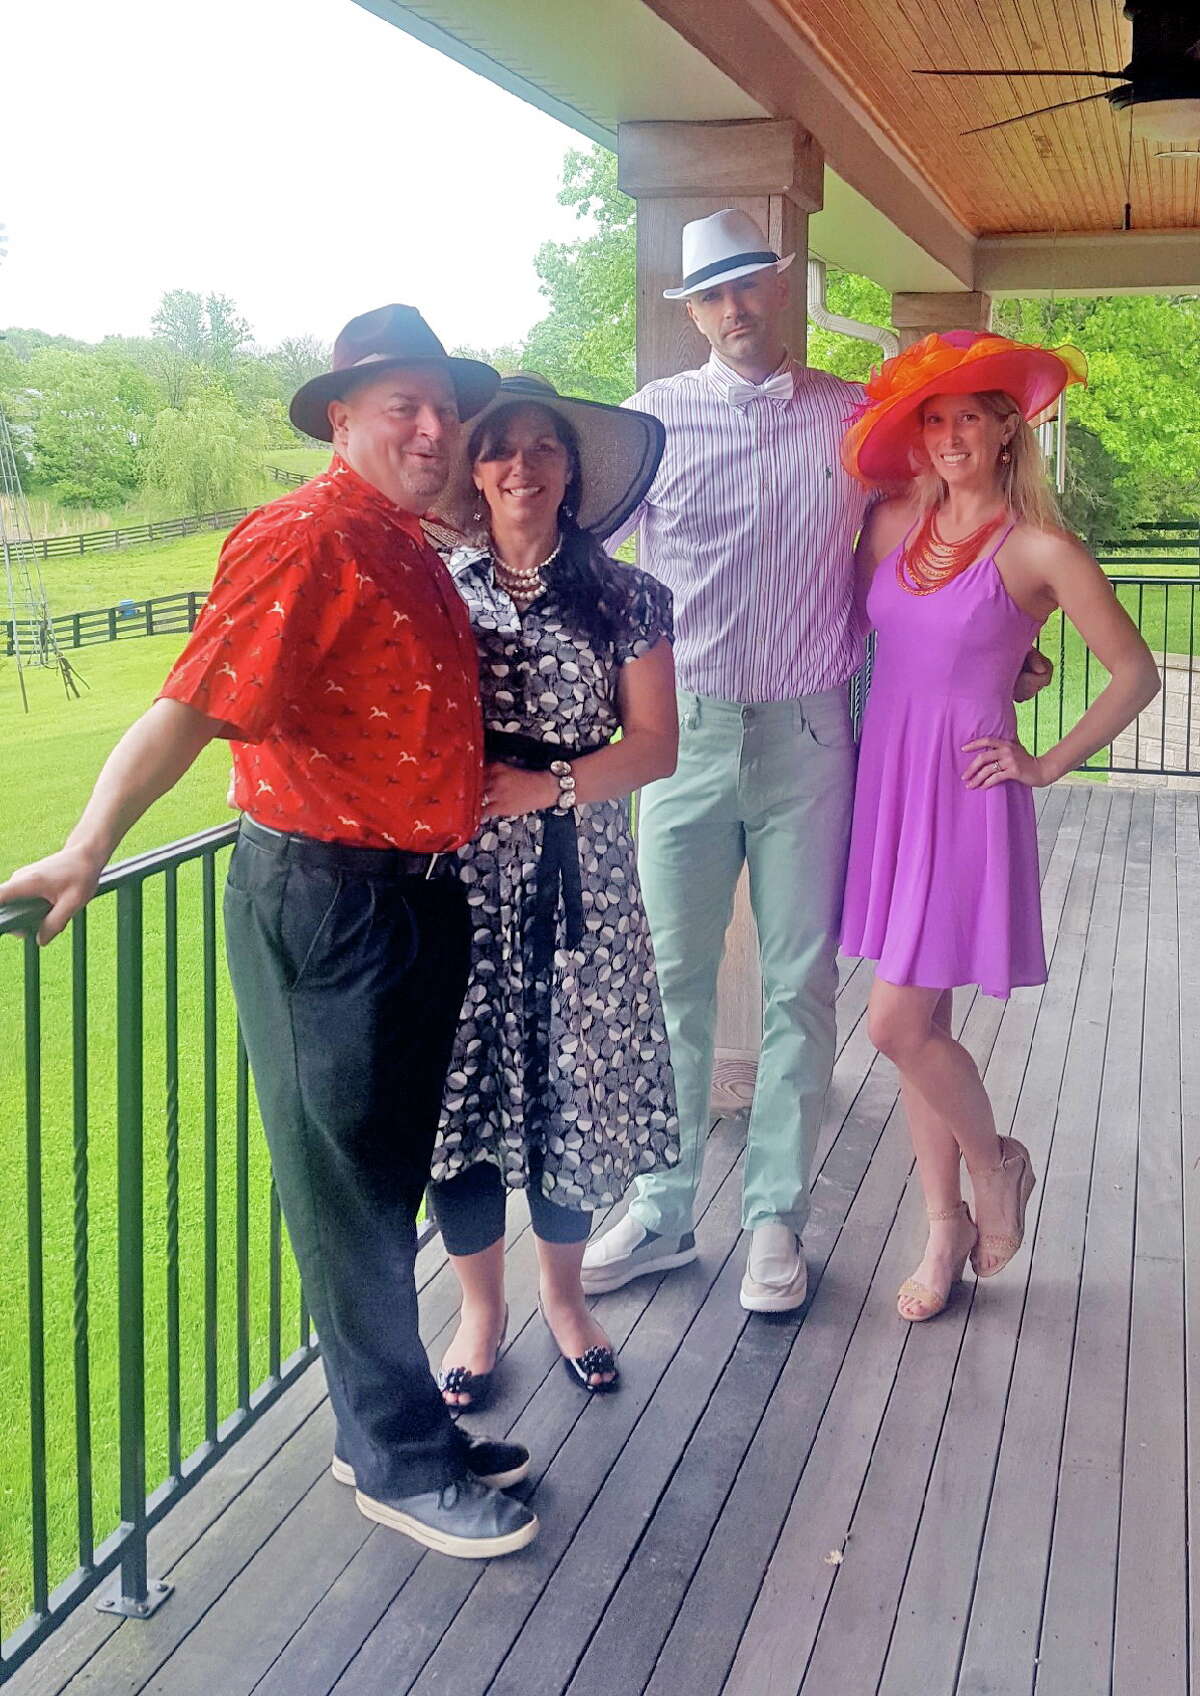   Our best attempt to fit in with the extravagantly dressed individuals of the Kentucky Derby. 